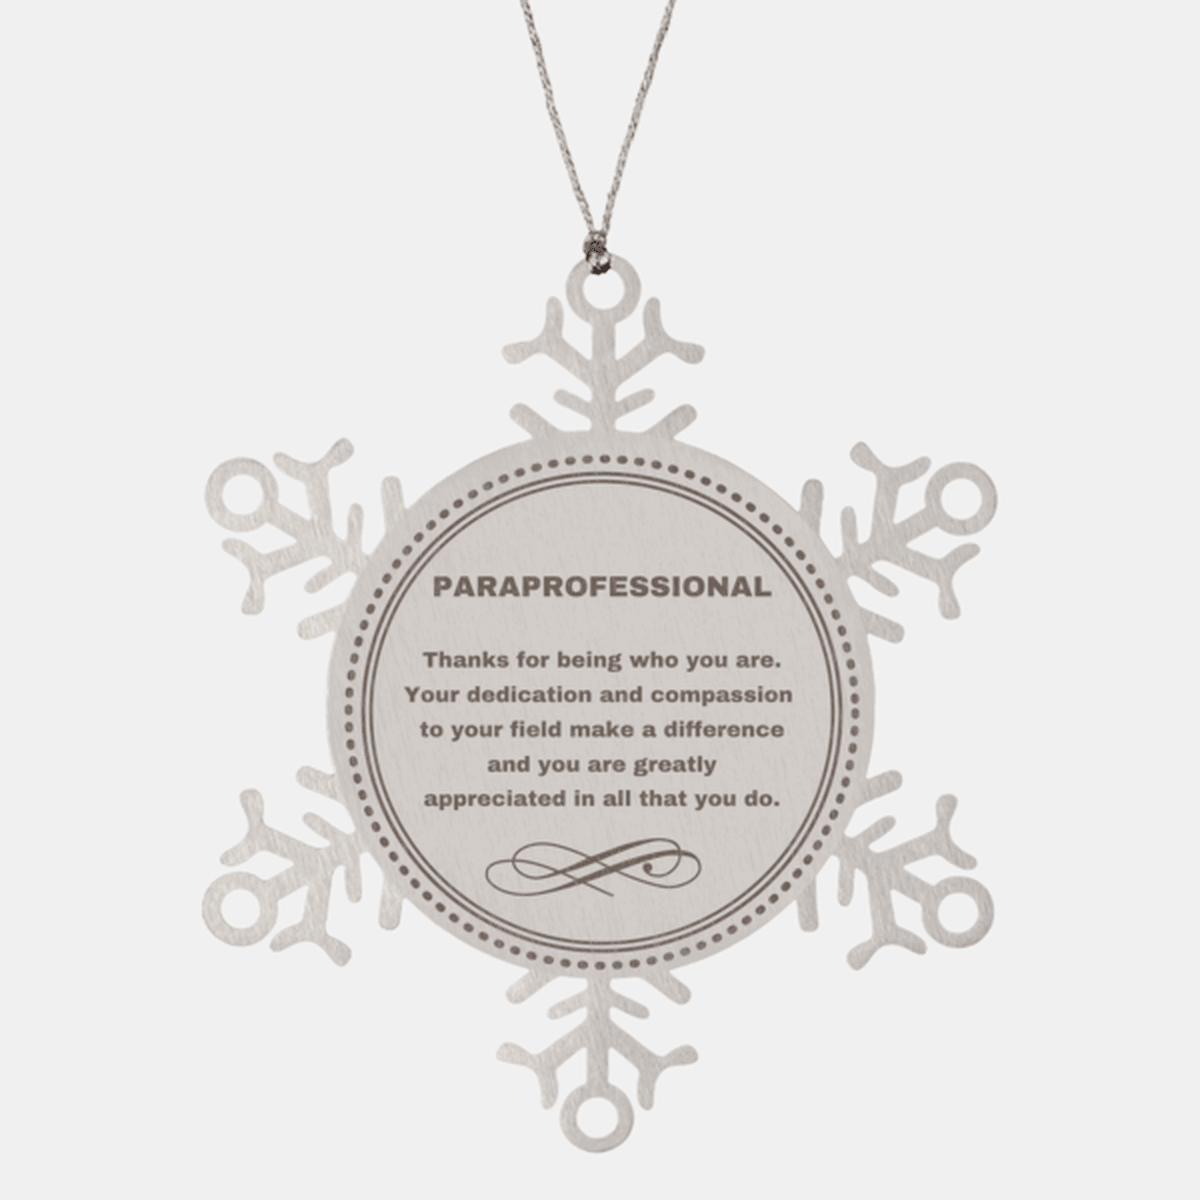 Paraprofessional Snowflake Ornament - Thanks for being who you are - Birthday Christmas Jewelry Gifts Coworkers Colleague Boss - Mallard Moon Gift Shop